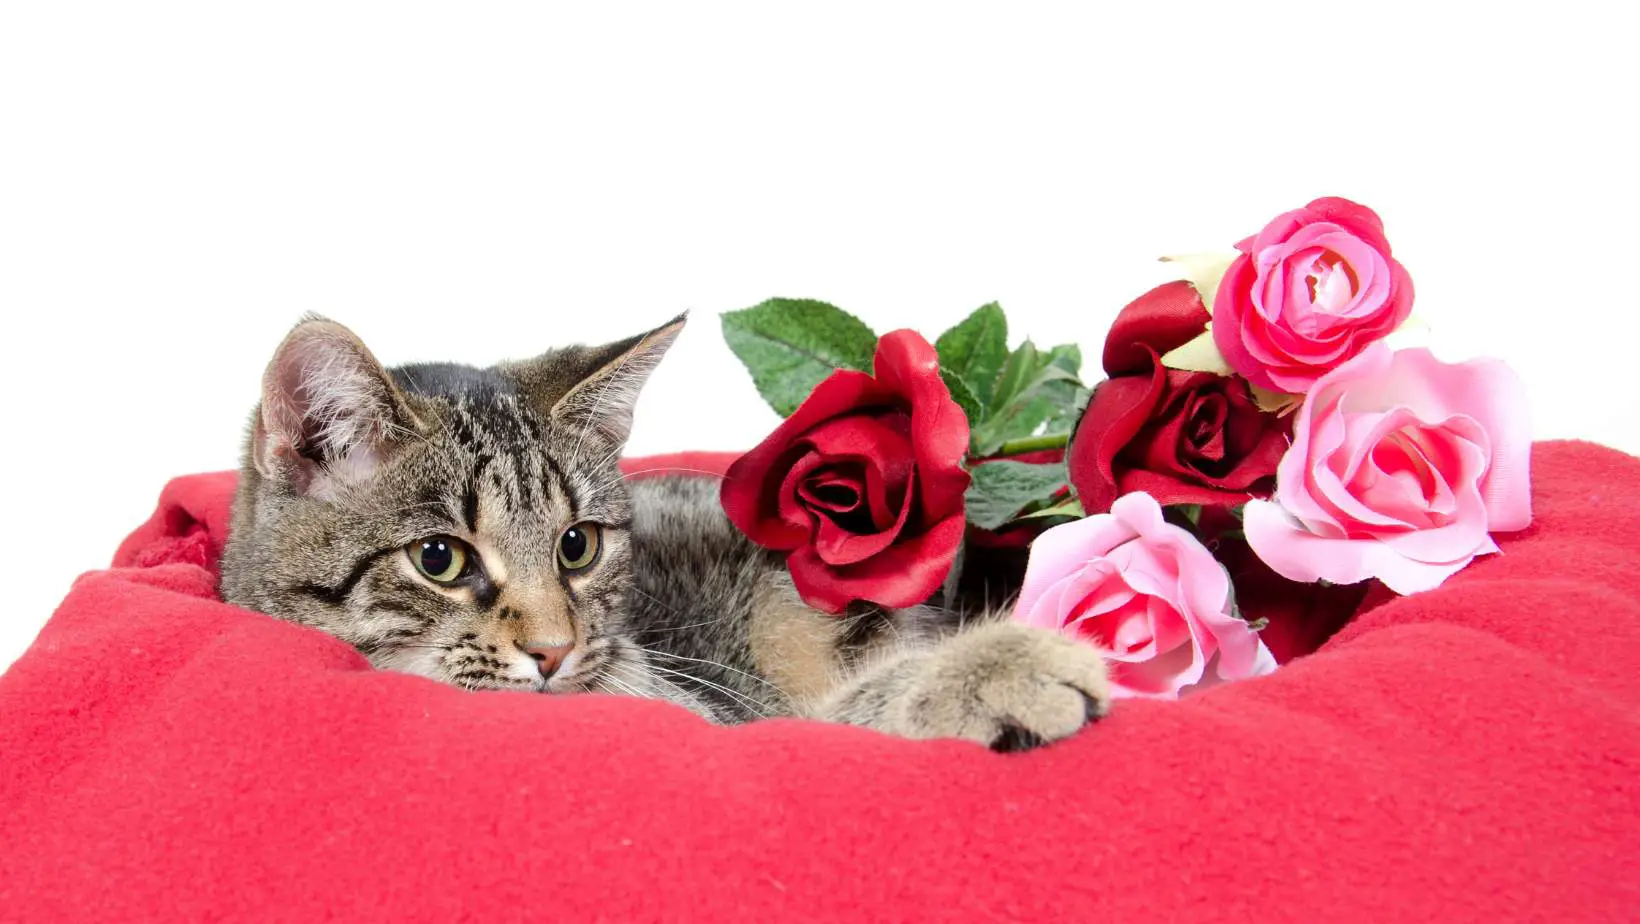 Why Are Cats Attracted to Roses?